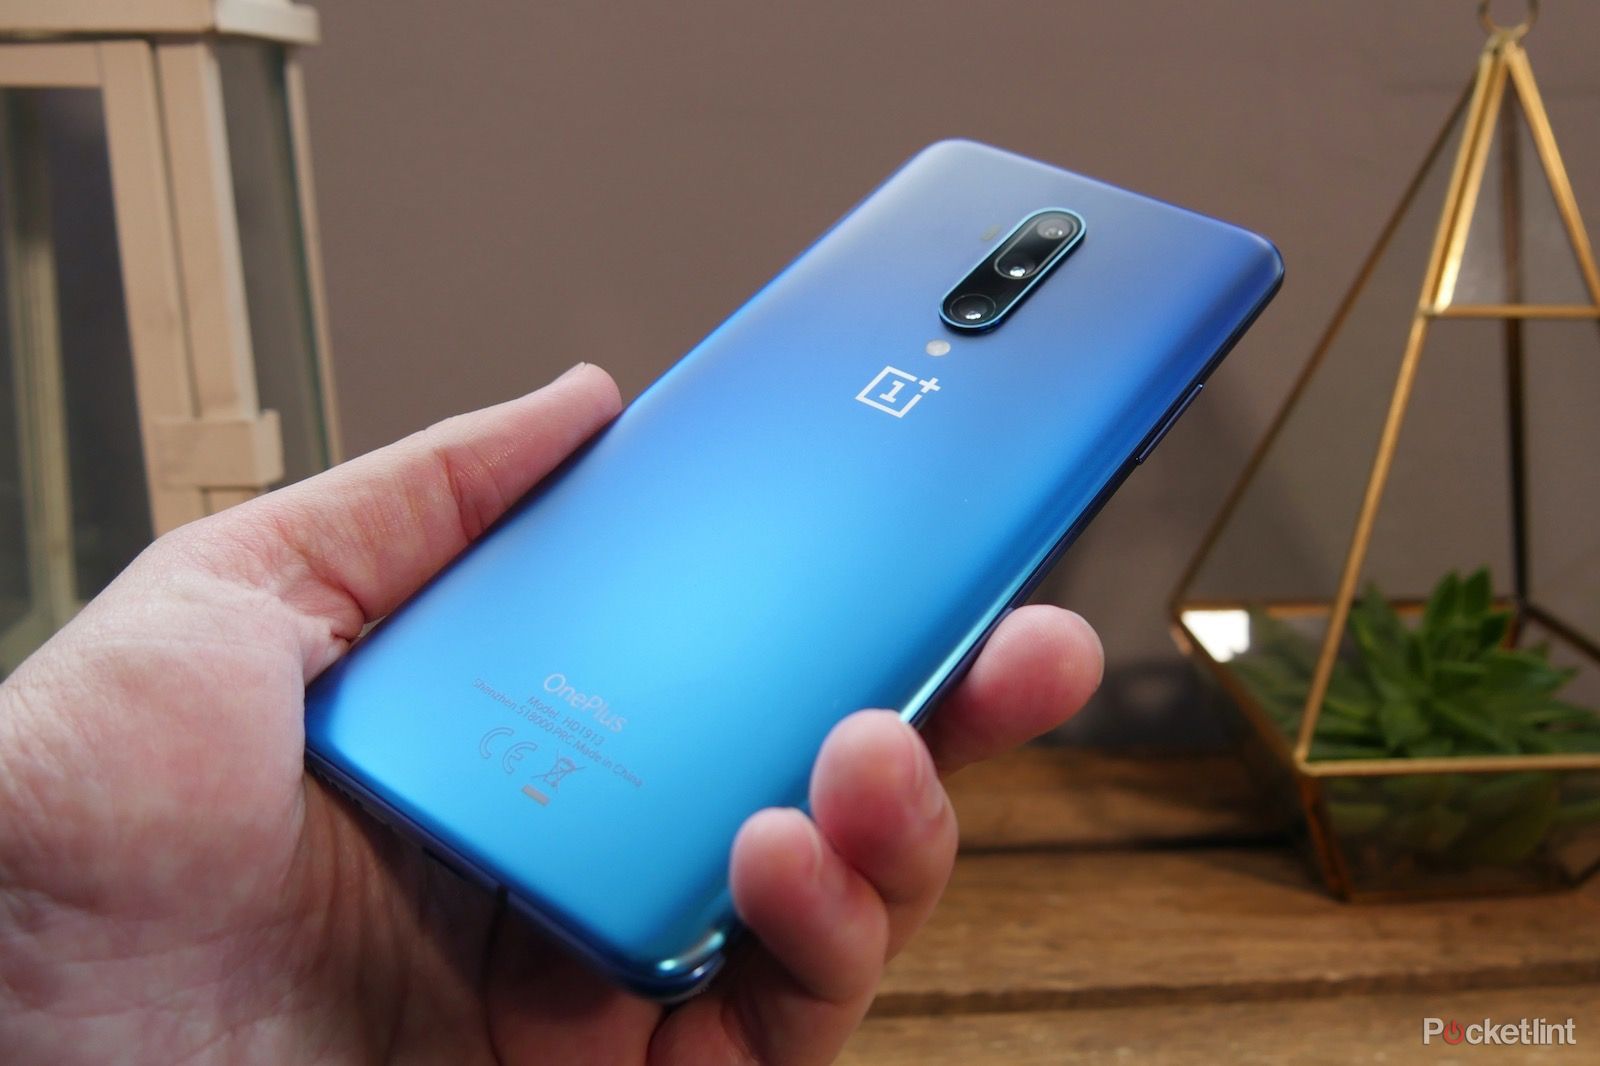 Specs revealed OnePlus 8 and 8 Pro will probably be the fastest smartphones around image 1